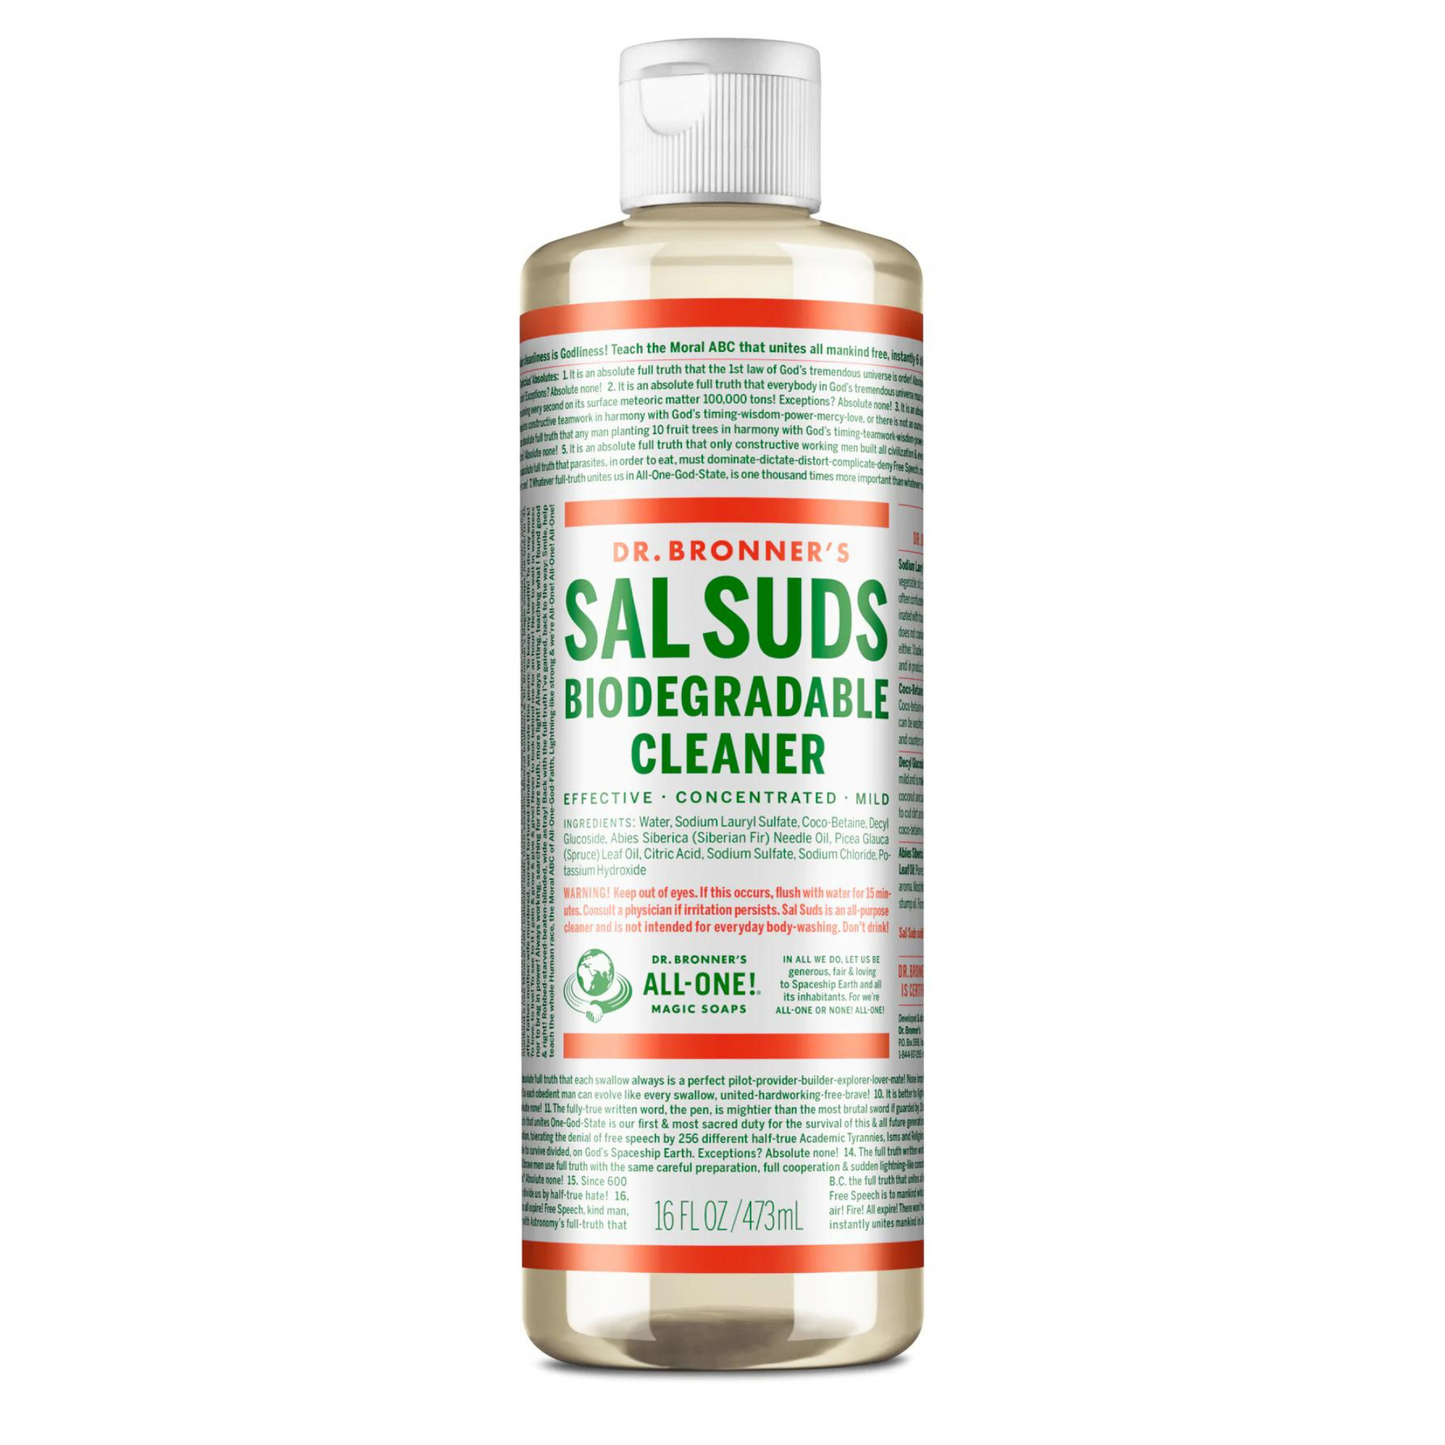 Primary Image of Dr. Bronner's Sal Suds Biodegradable Cleaner (16 fl oz)